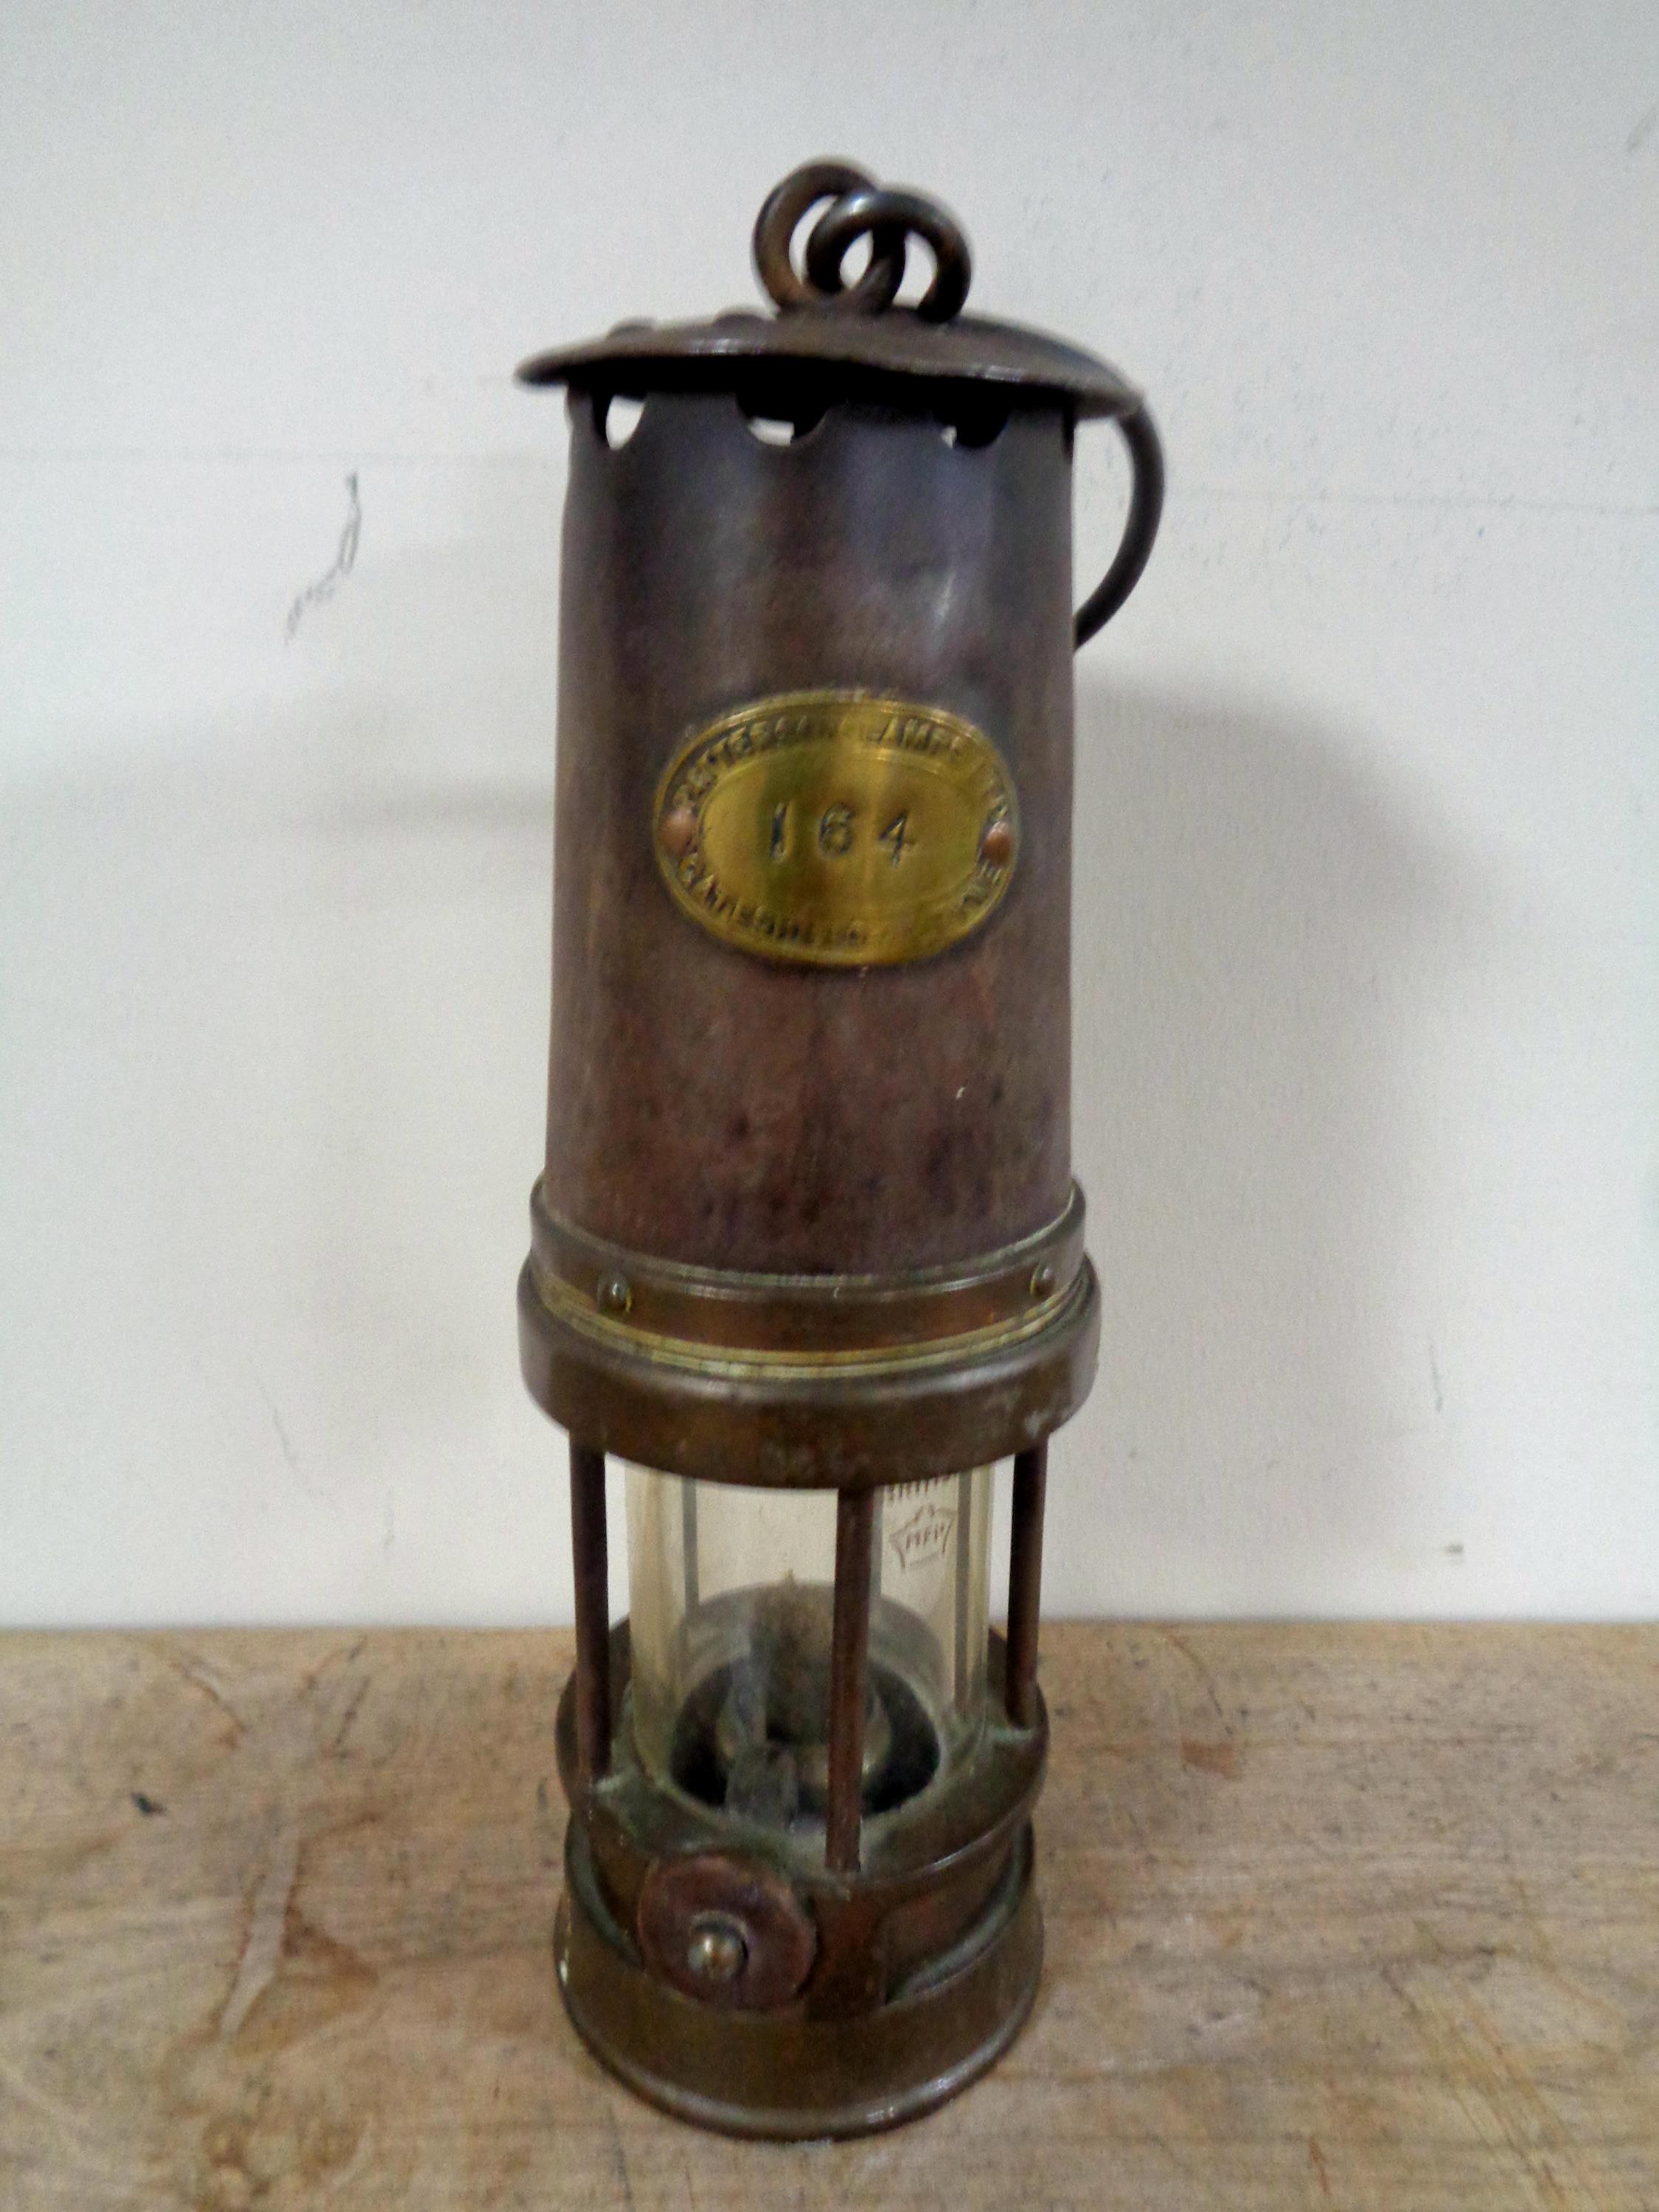 A Patterson miner's lamp numbered 164